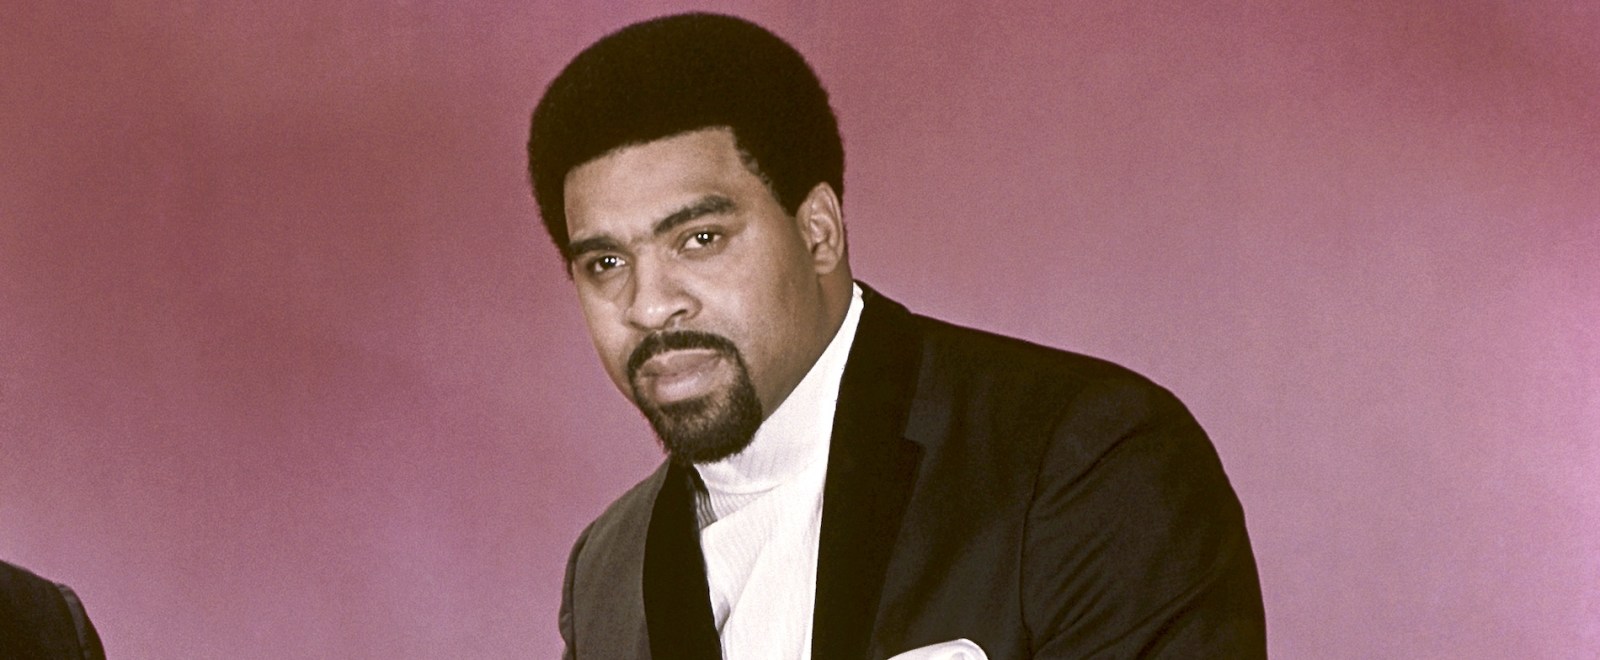 Rudolph Isley A Founding Member Of The Isley Brothers Is Reportedly Dead At 84